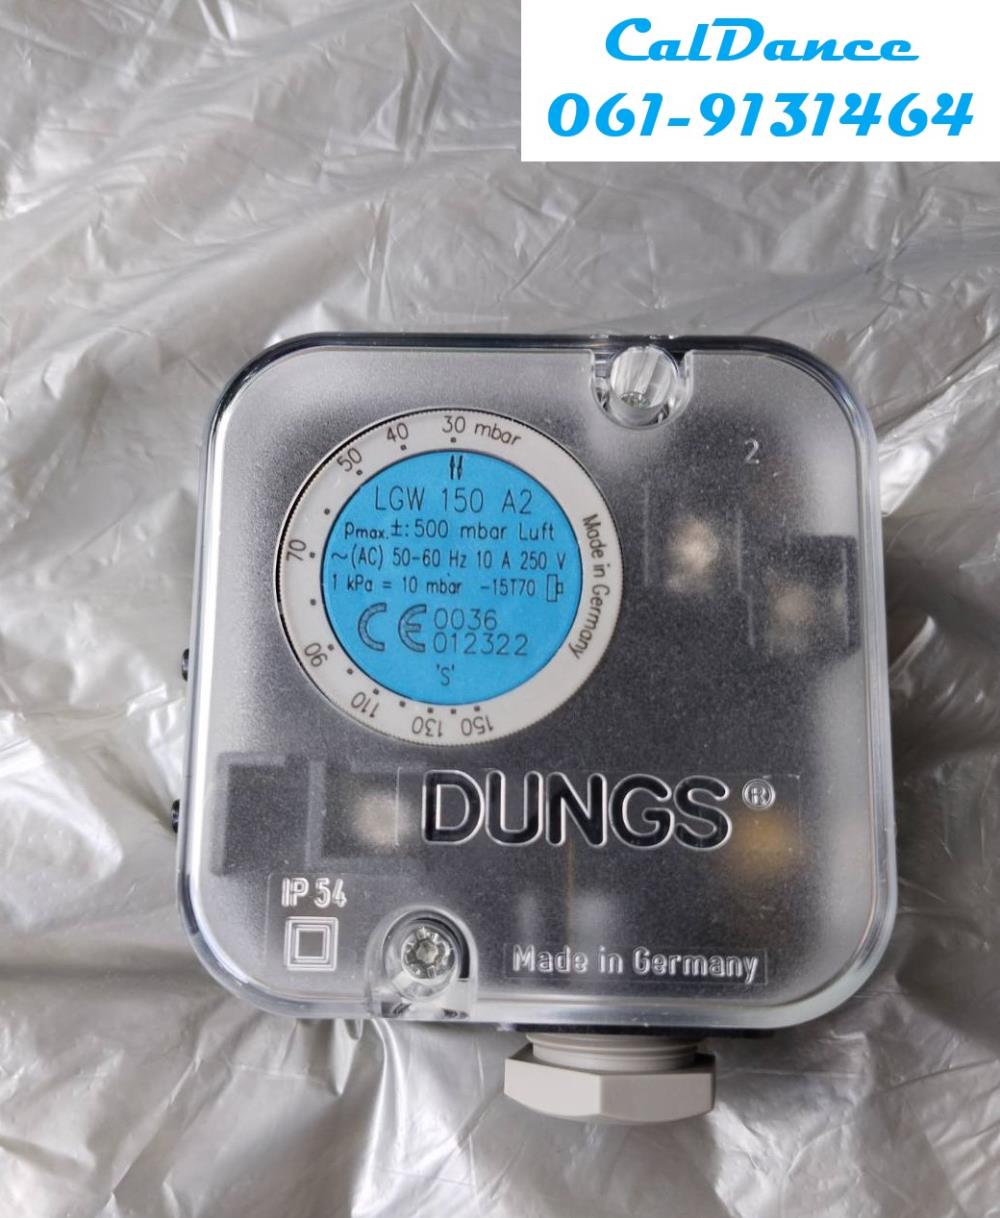 "DUNGS" Pressure Switch LGW 150 A2,"DUNGS" Pressure Switch LGW 150 A2,"DUNGS" Pressure Switch LGW 150 A2,Instruments and Controls/Switches